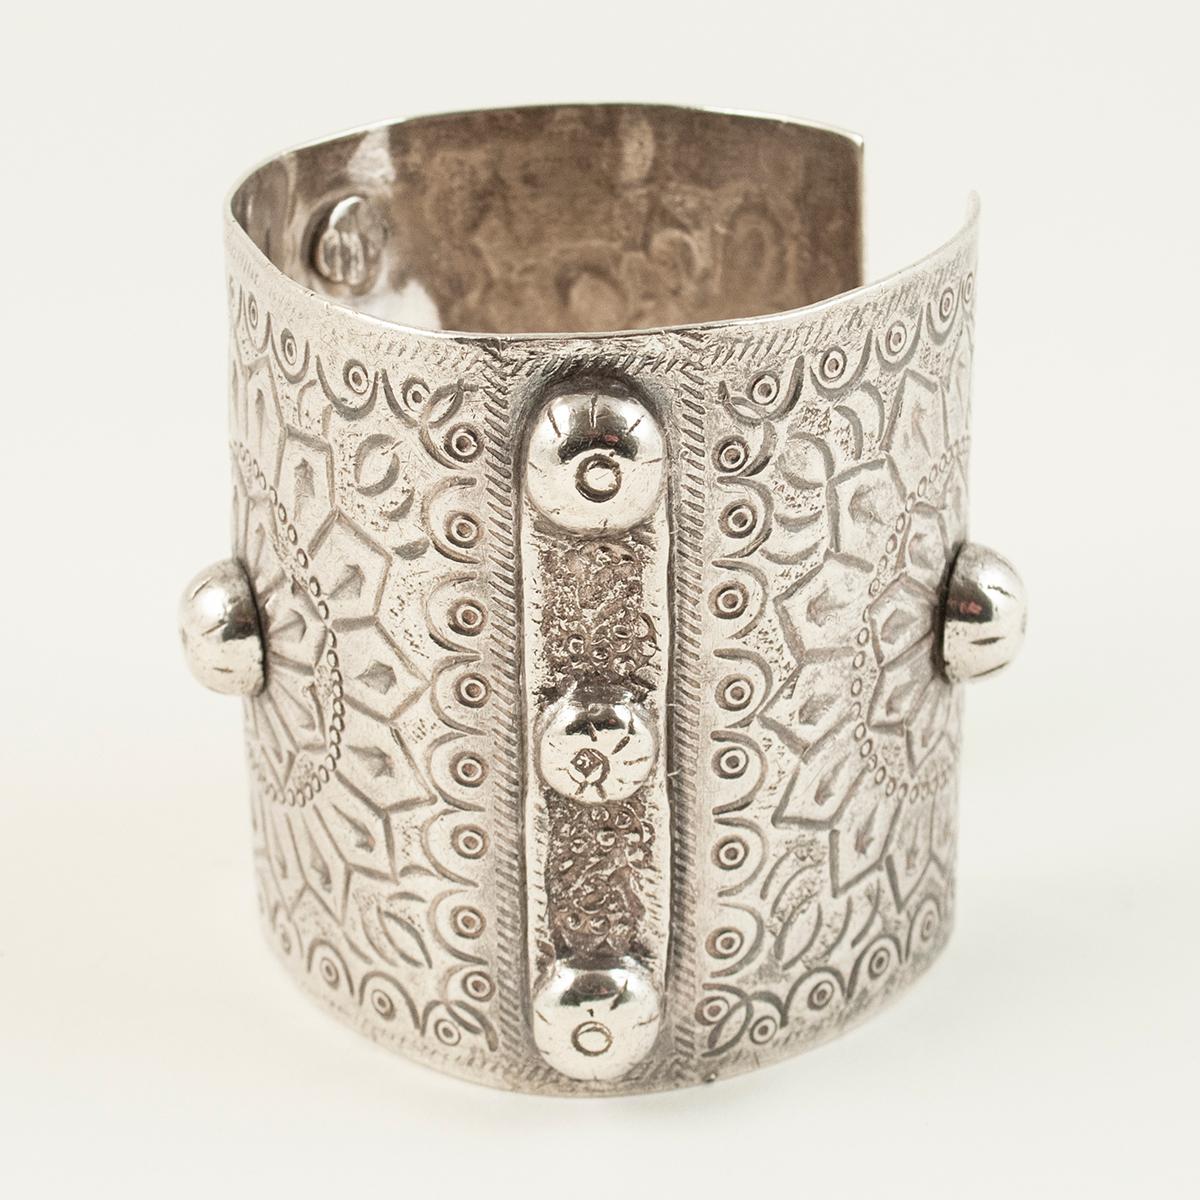 Mid-20th century silver tribal cuff, Berber People, Siwa Oasis, Egypt

A traditional cuff from Siwa Oasis with a sun motif. The three part silver hallmark indicates, from left to right: a purity of 800, the lotus, which is used for all pieces made